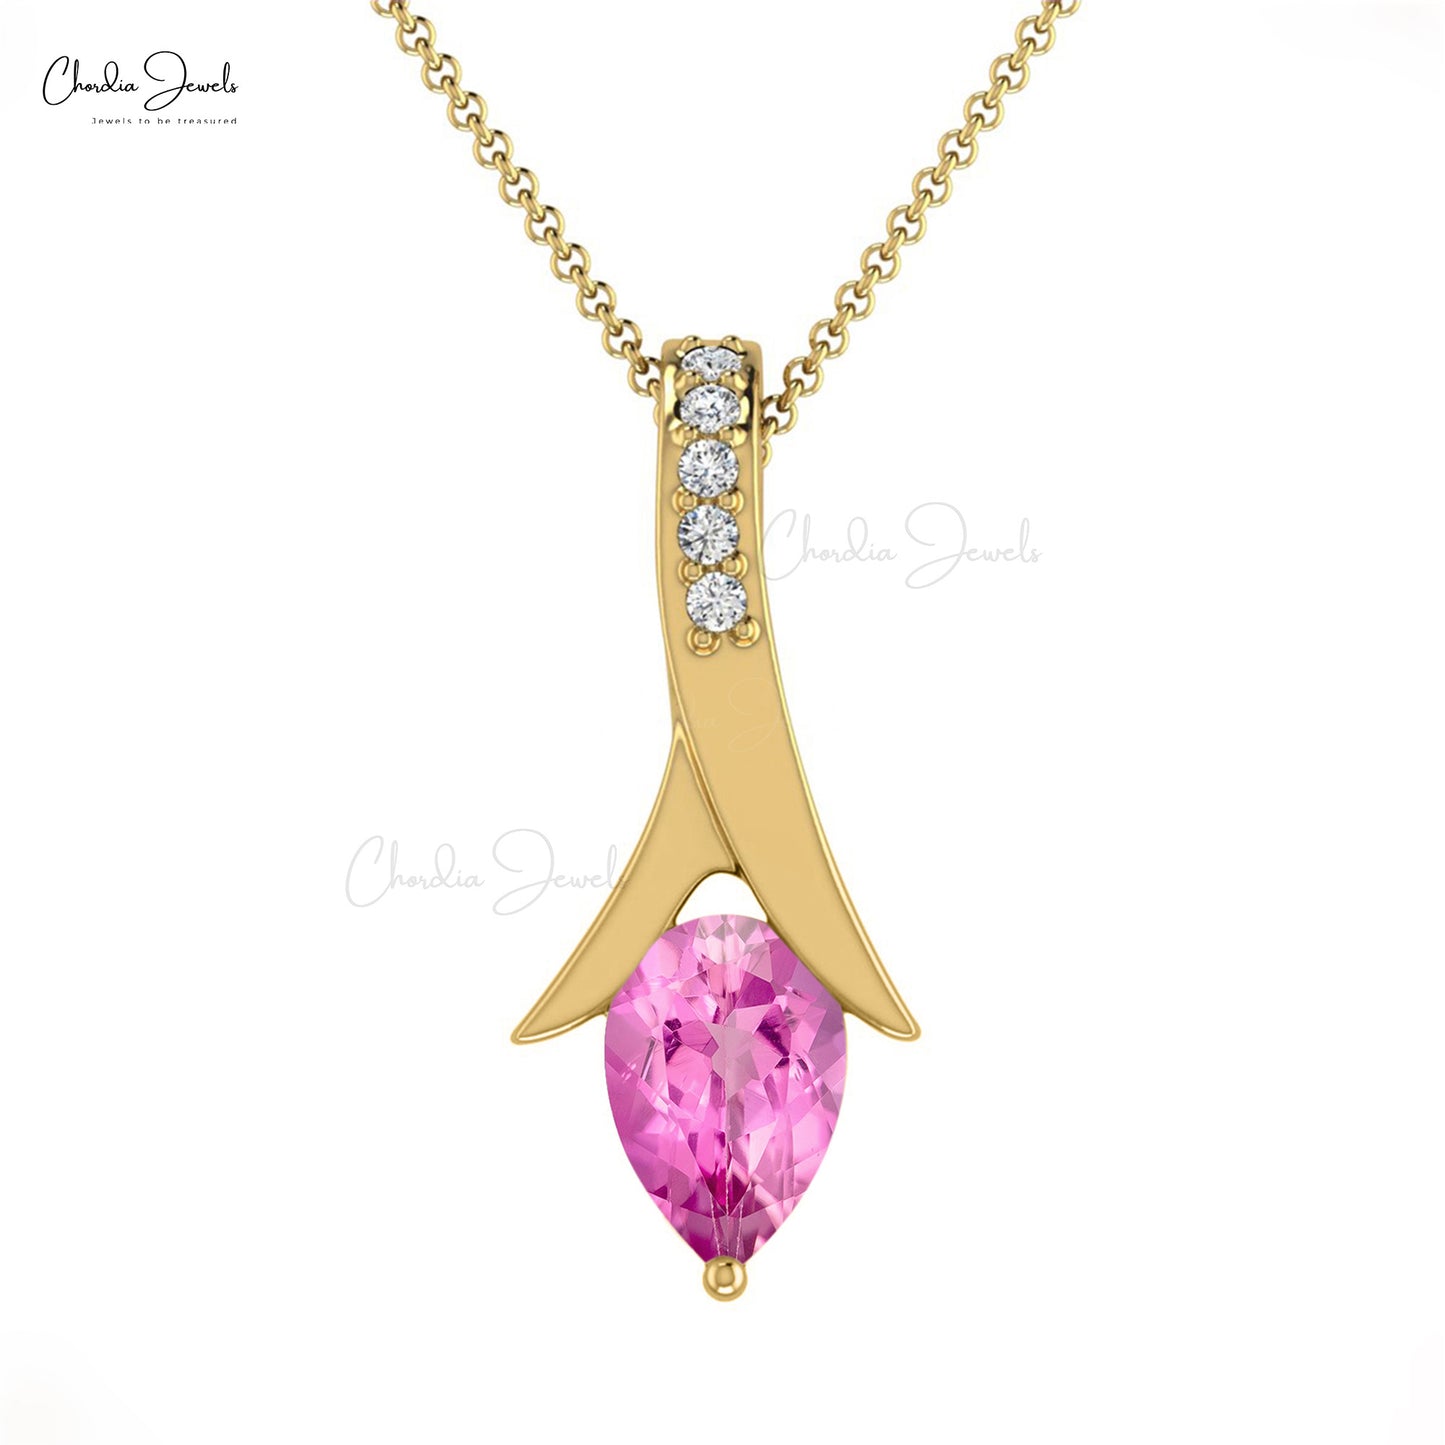 Buy Our Natural Pink Sapphire and White Diamond Dangling Pendant